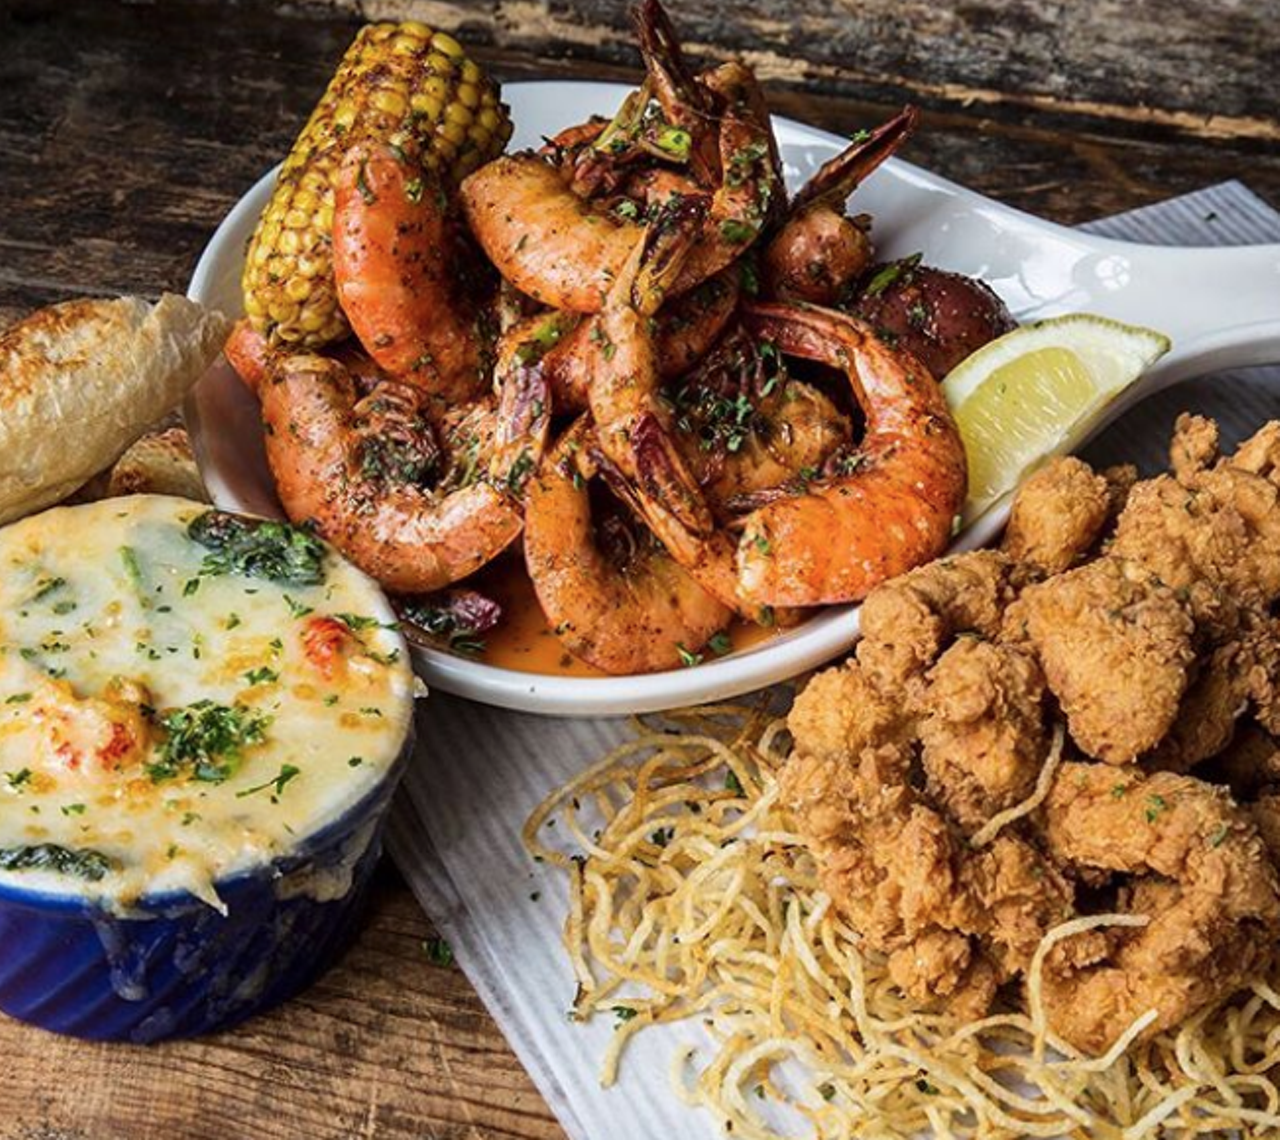 Pappadeaux Seafood Kitchen
Multiple locations, 
Founded by members of the Pappas family, this chain – which has two locations in the San Antonio area – offers quality and super tasty seafood dishes. The Pappas family restaurants, headquartered in Houston, are part of one of the largest family-owned and -operated restaurant companies in the U.S.
Photo via Instagram / pappadeaux